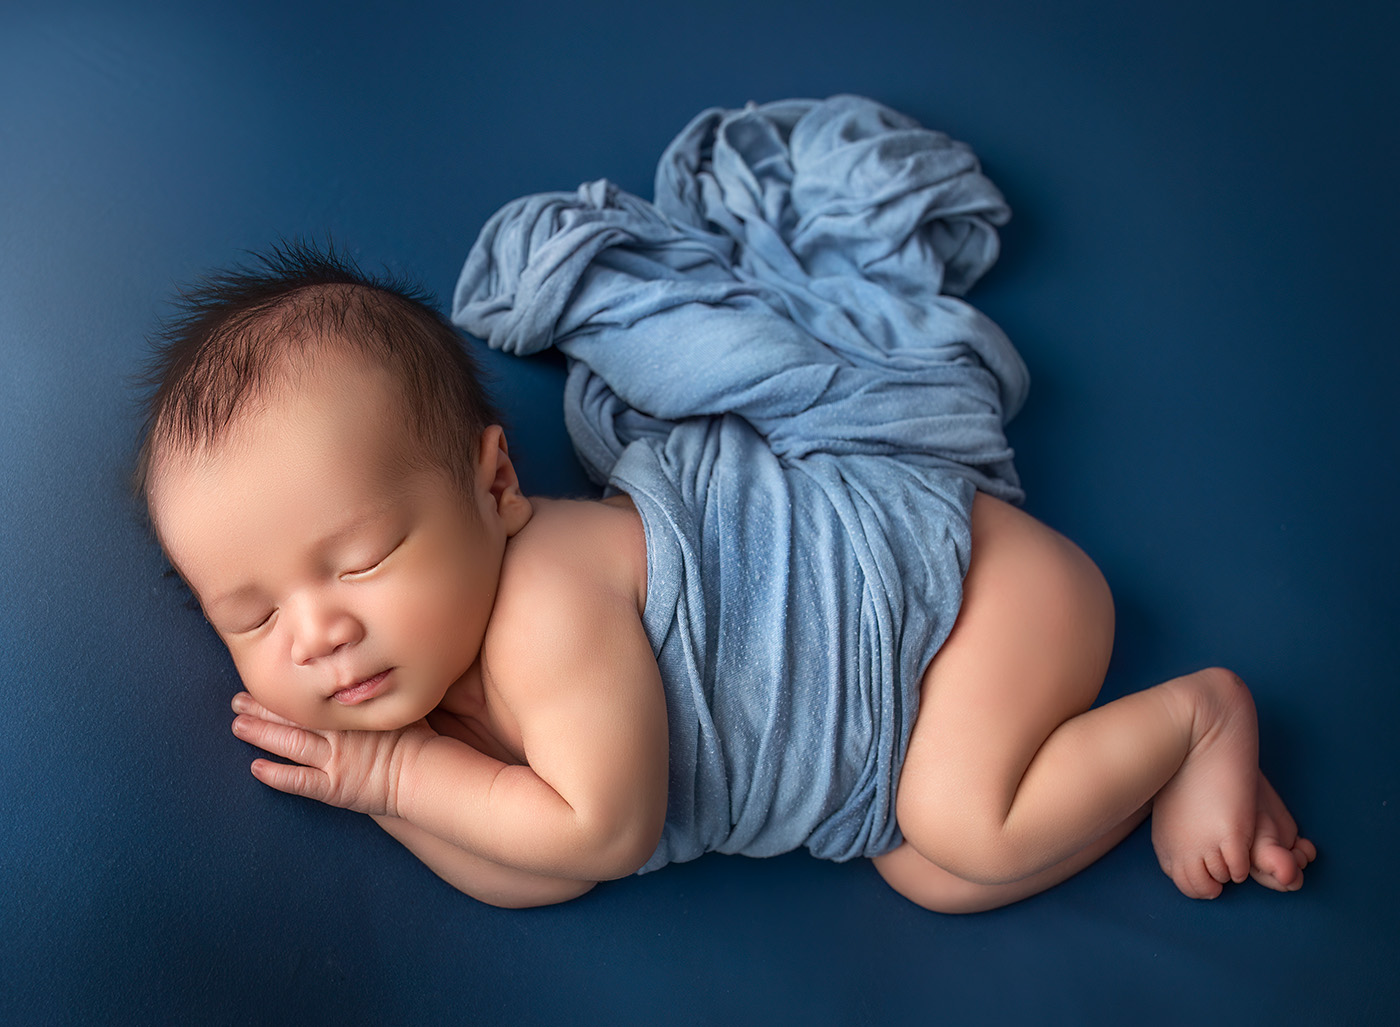 vibrant newborn photos baby boy sleeping on a deep blue background with a light blue wrap over his tummy on his side with his hands under his cheek